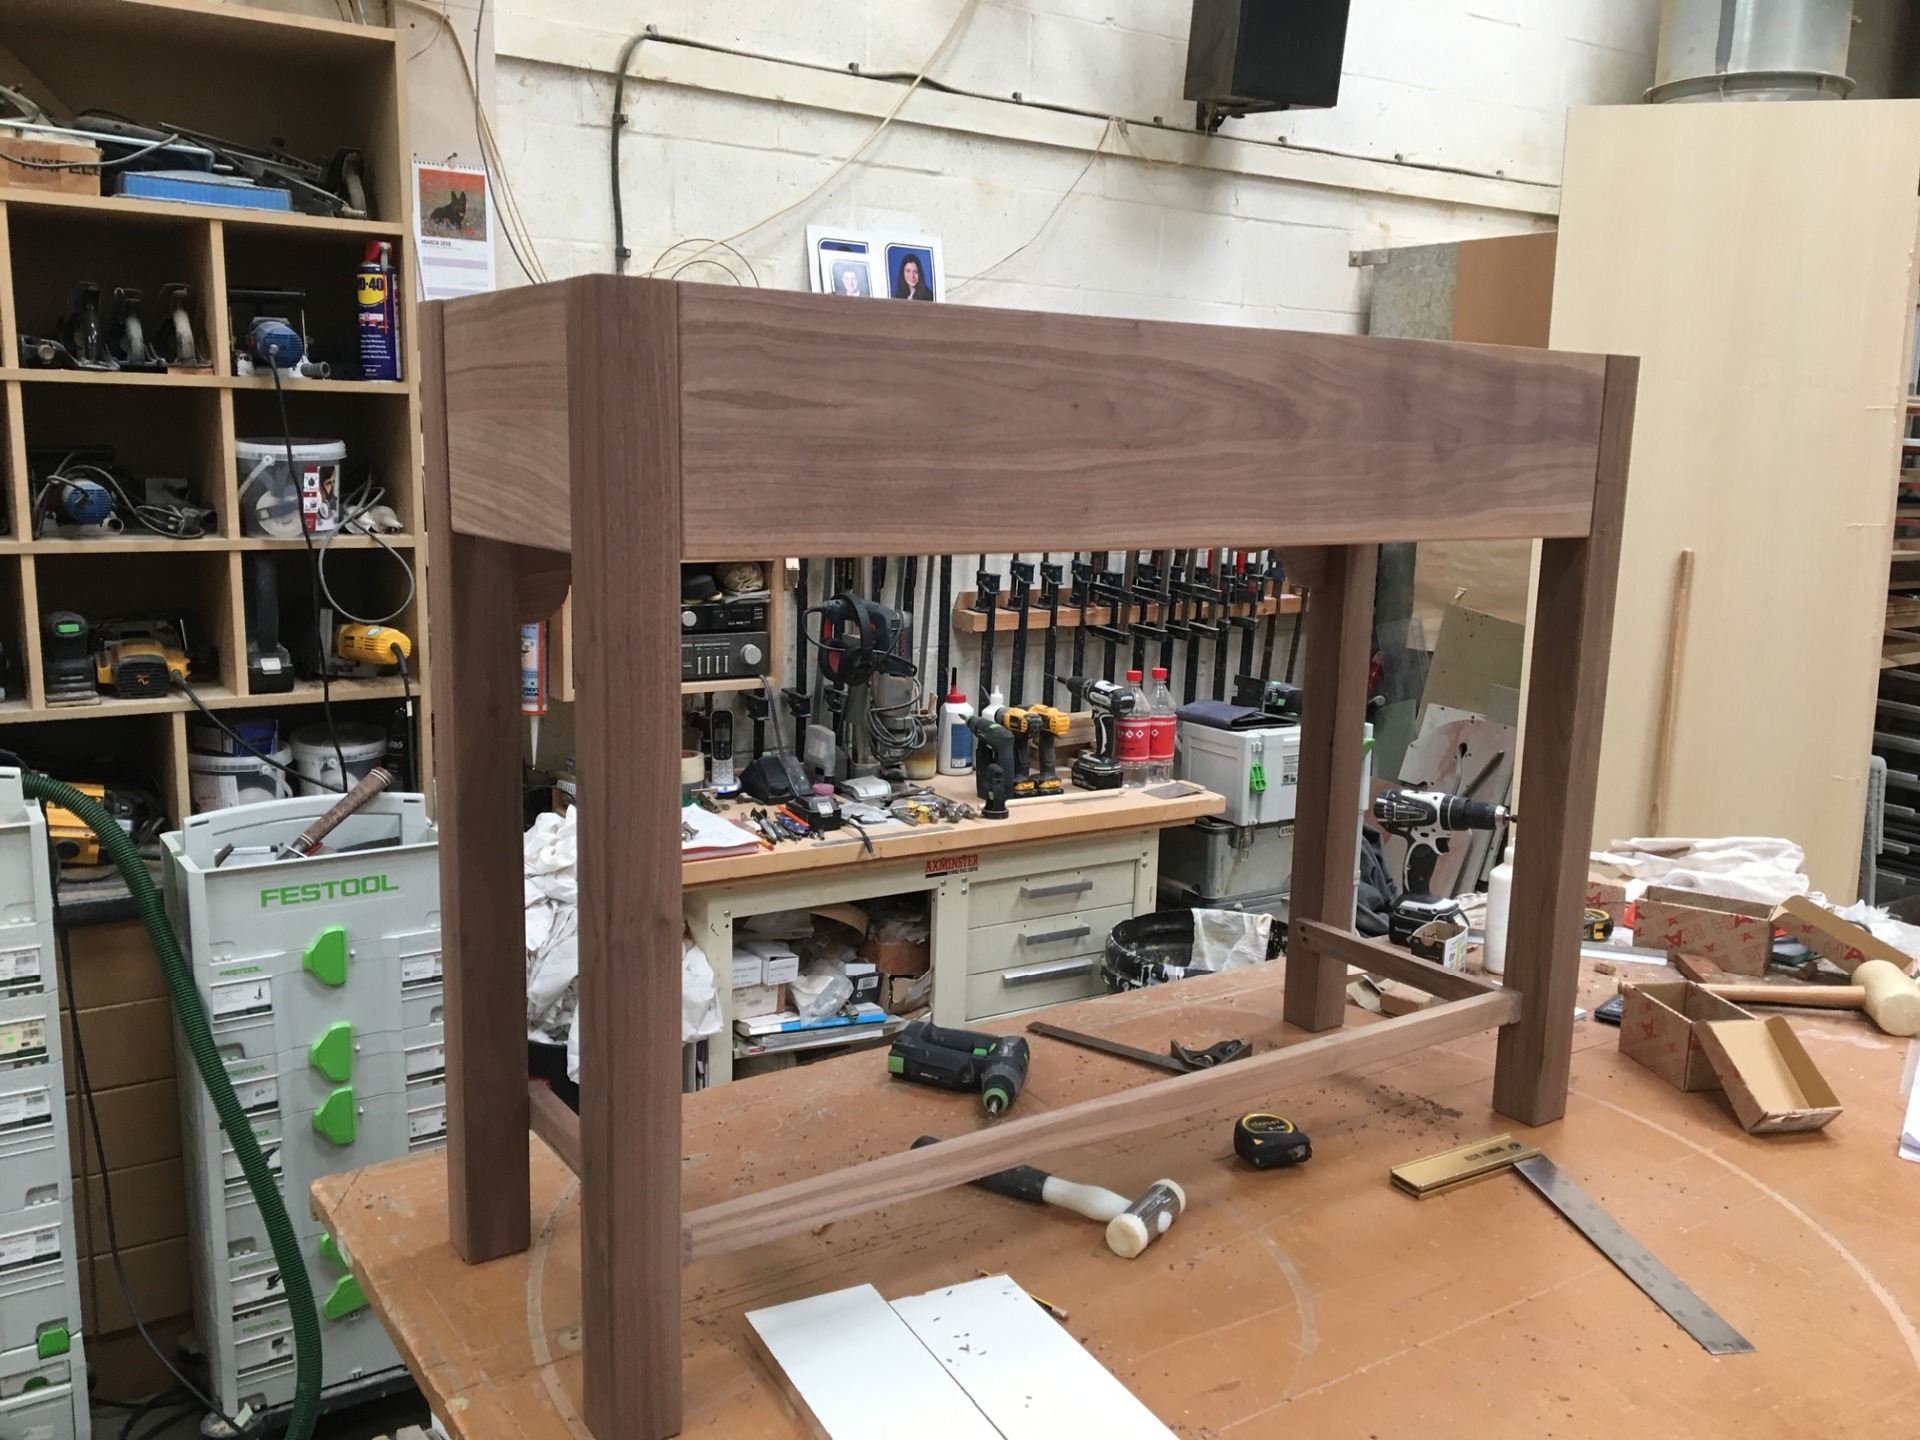 Console table being manufactured